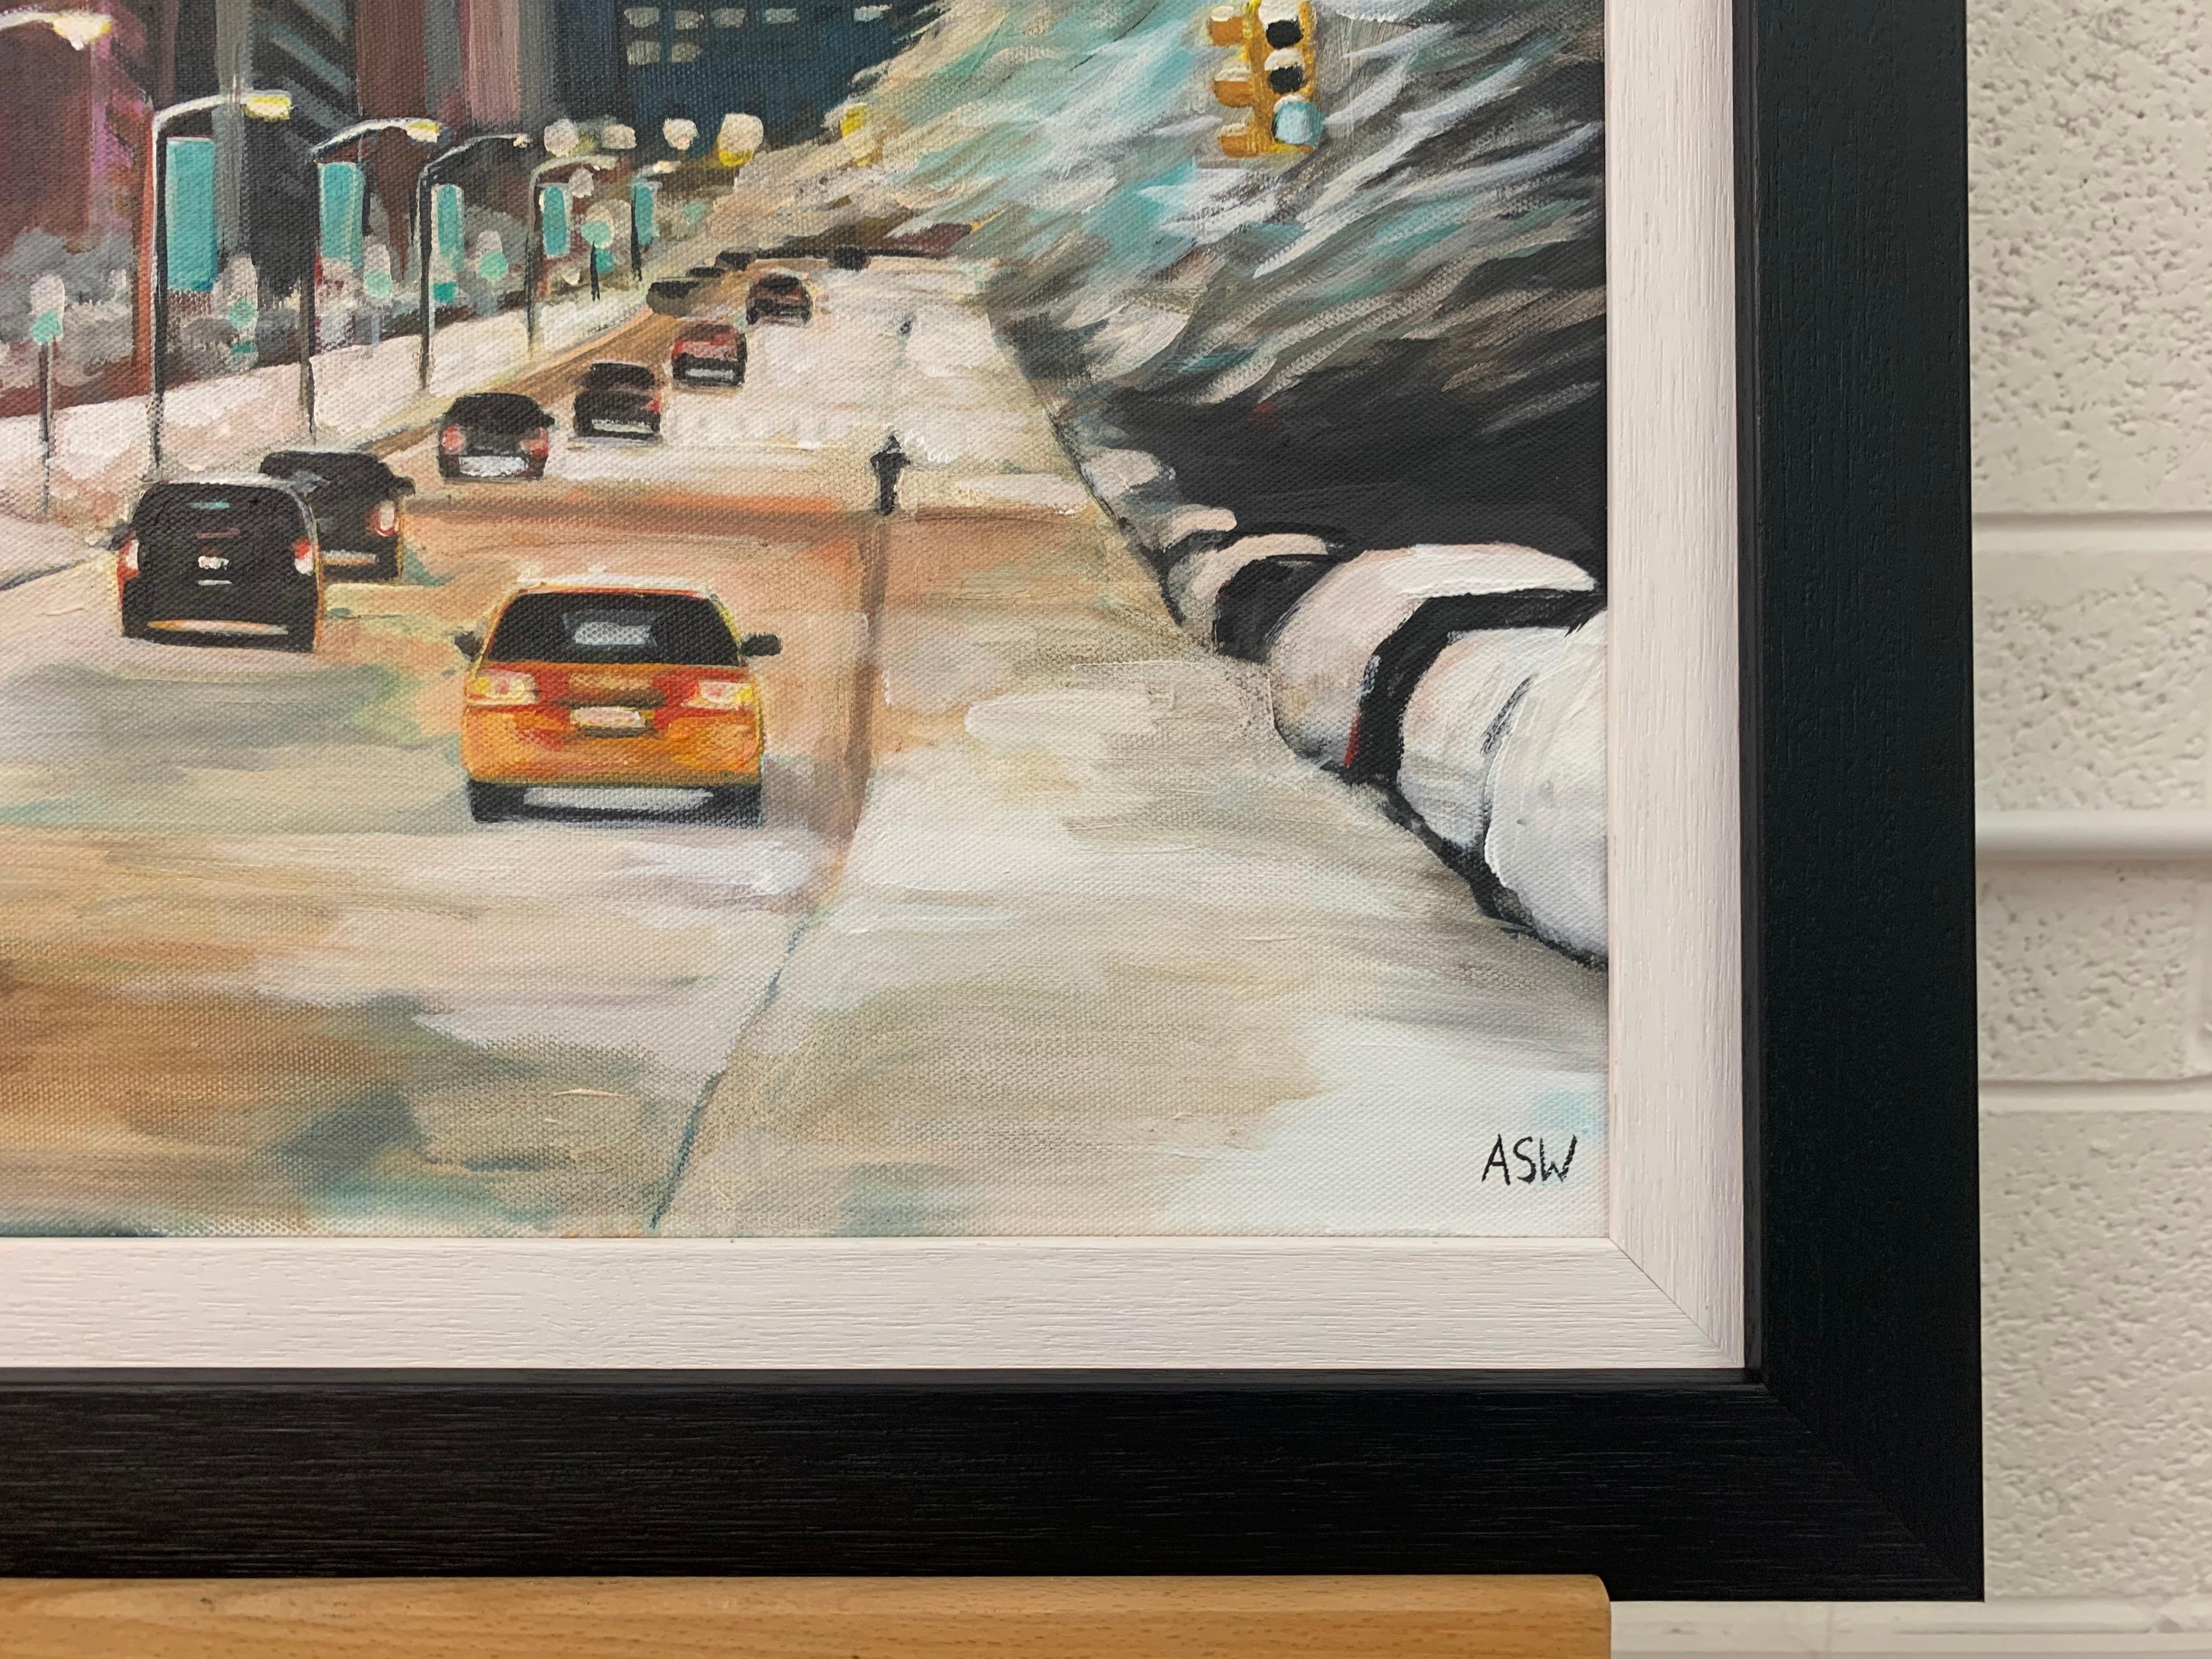 Painting of New York City Taxis in Winter Snow by Contemporary British Artist Urban Landscape Artist, Angela Wakefield

Art measures 20 x 30 inches
Frame measures 25 x 35 inches

Angela Wakefield has twice been on the front cover of ‘Art of England’